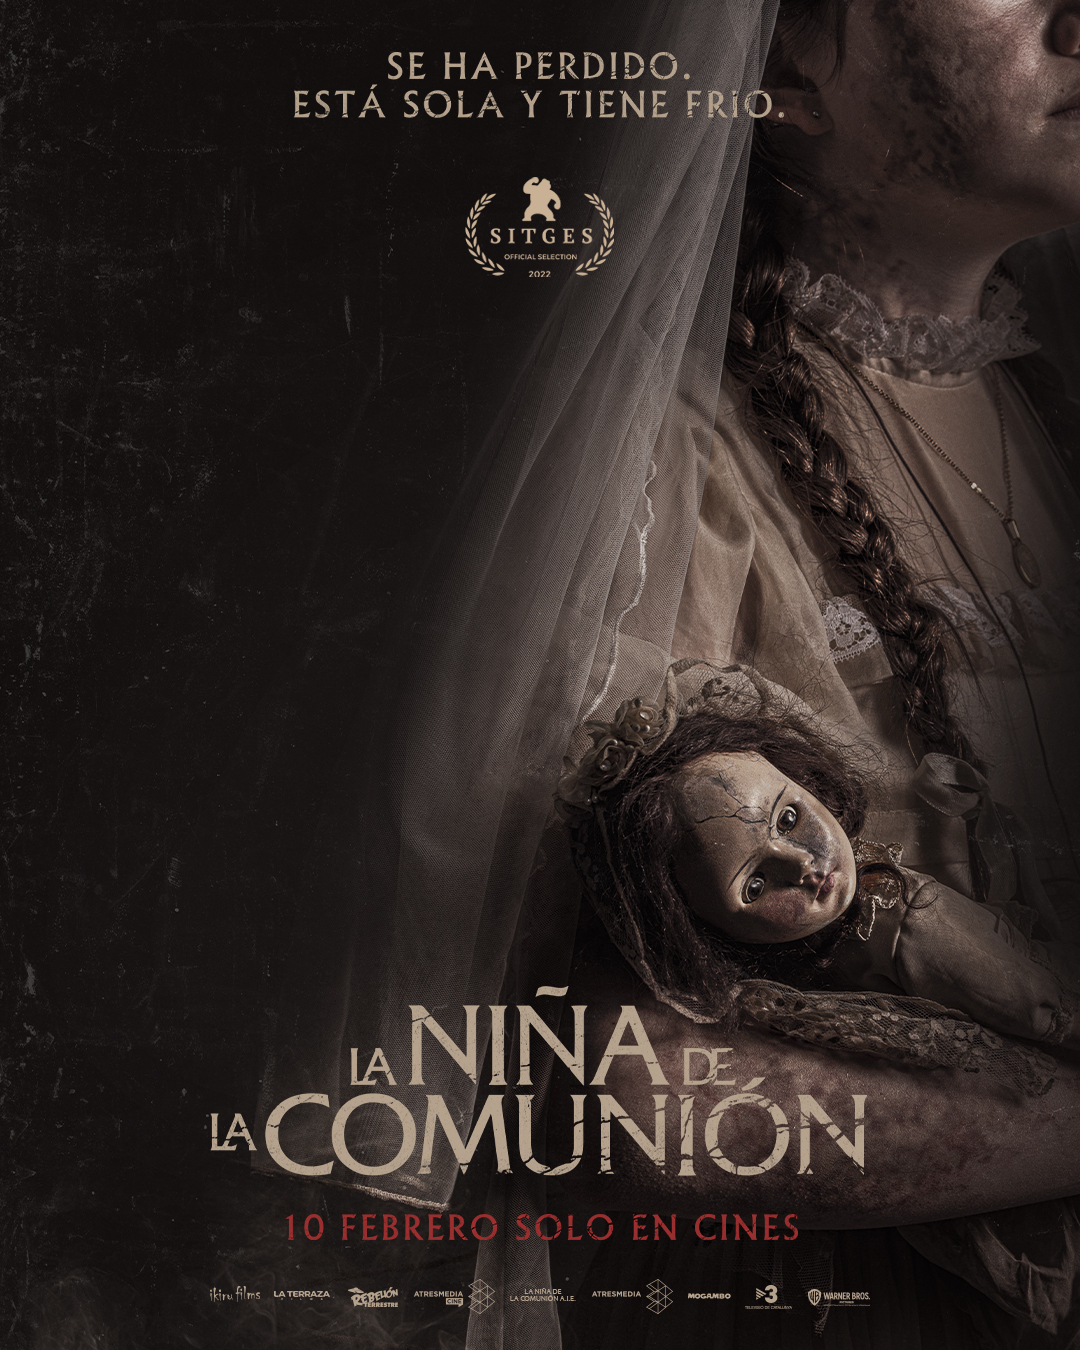 https://static.wikia.nocookie.net/warner-bros-entertainment/images/b/b6/The_Communion_Girl_poster.jpg/revision/latest?cb=20230228165236